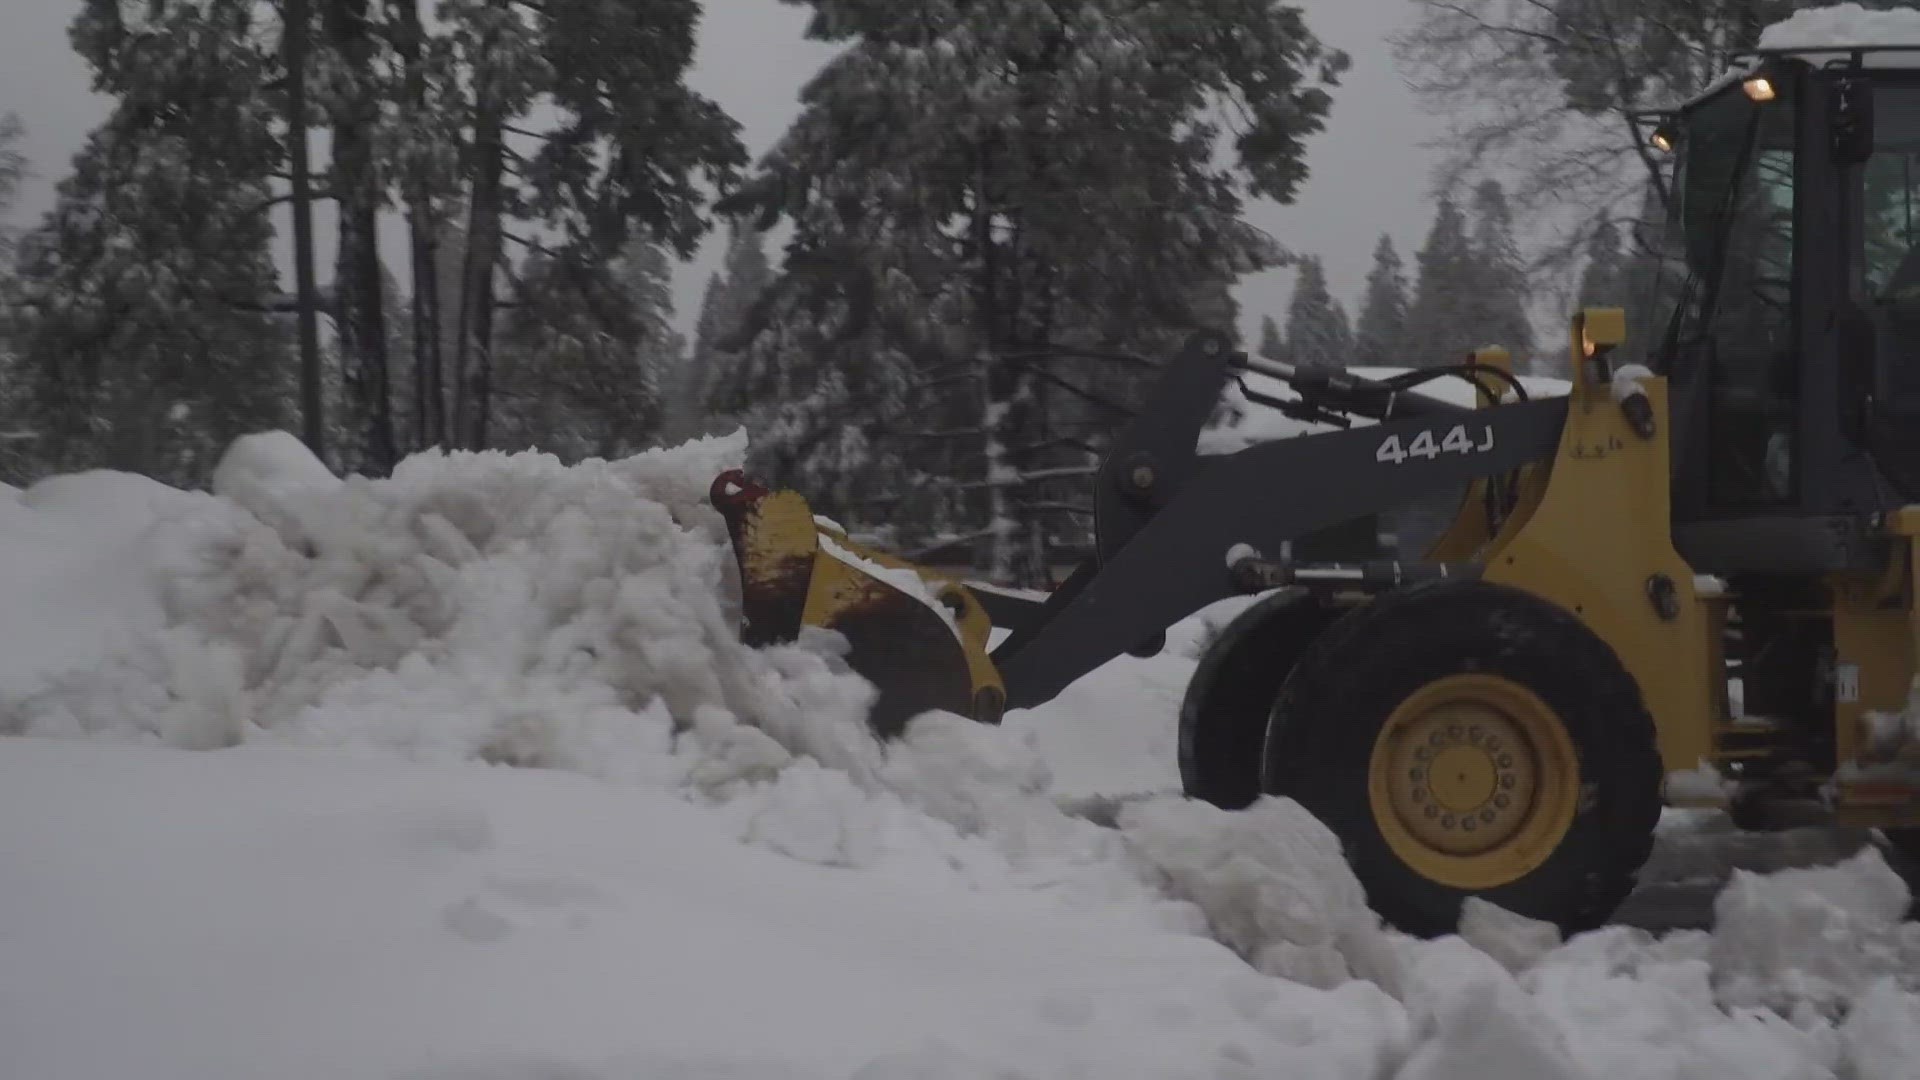 People in Pollock Pines are digging themselves out of the snow after a blizzard in the Sierra.